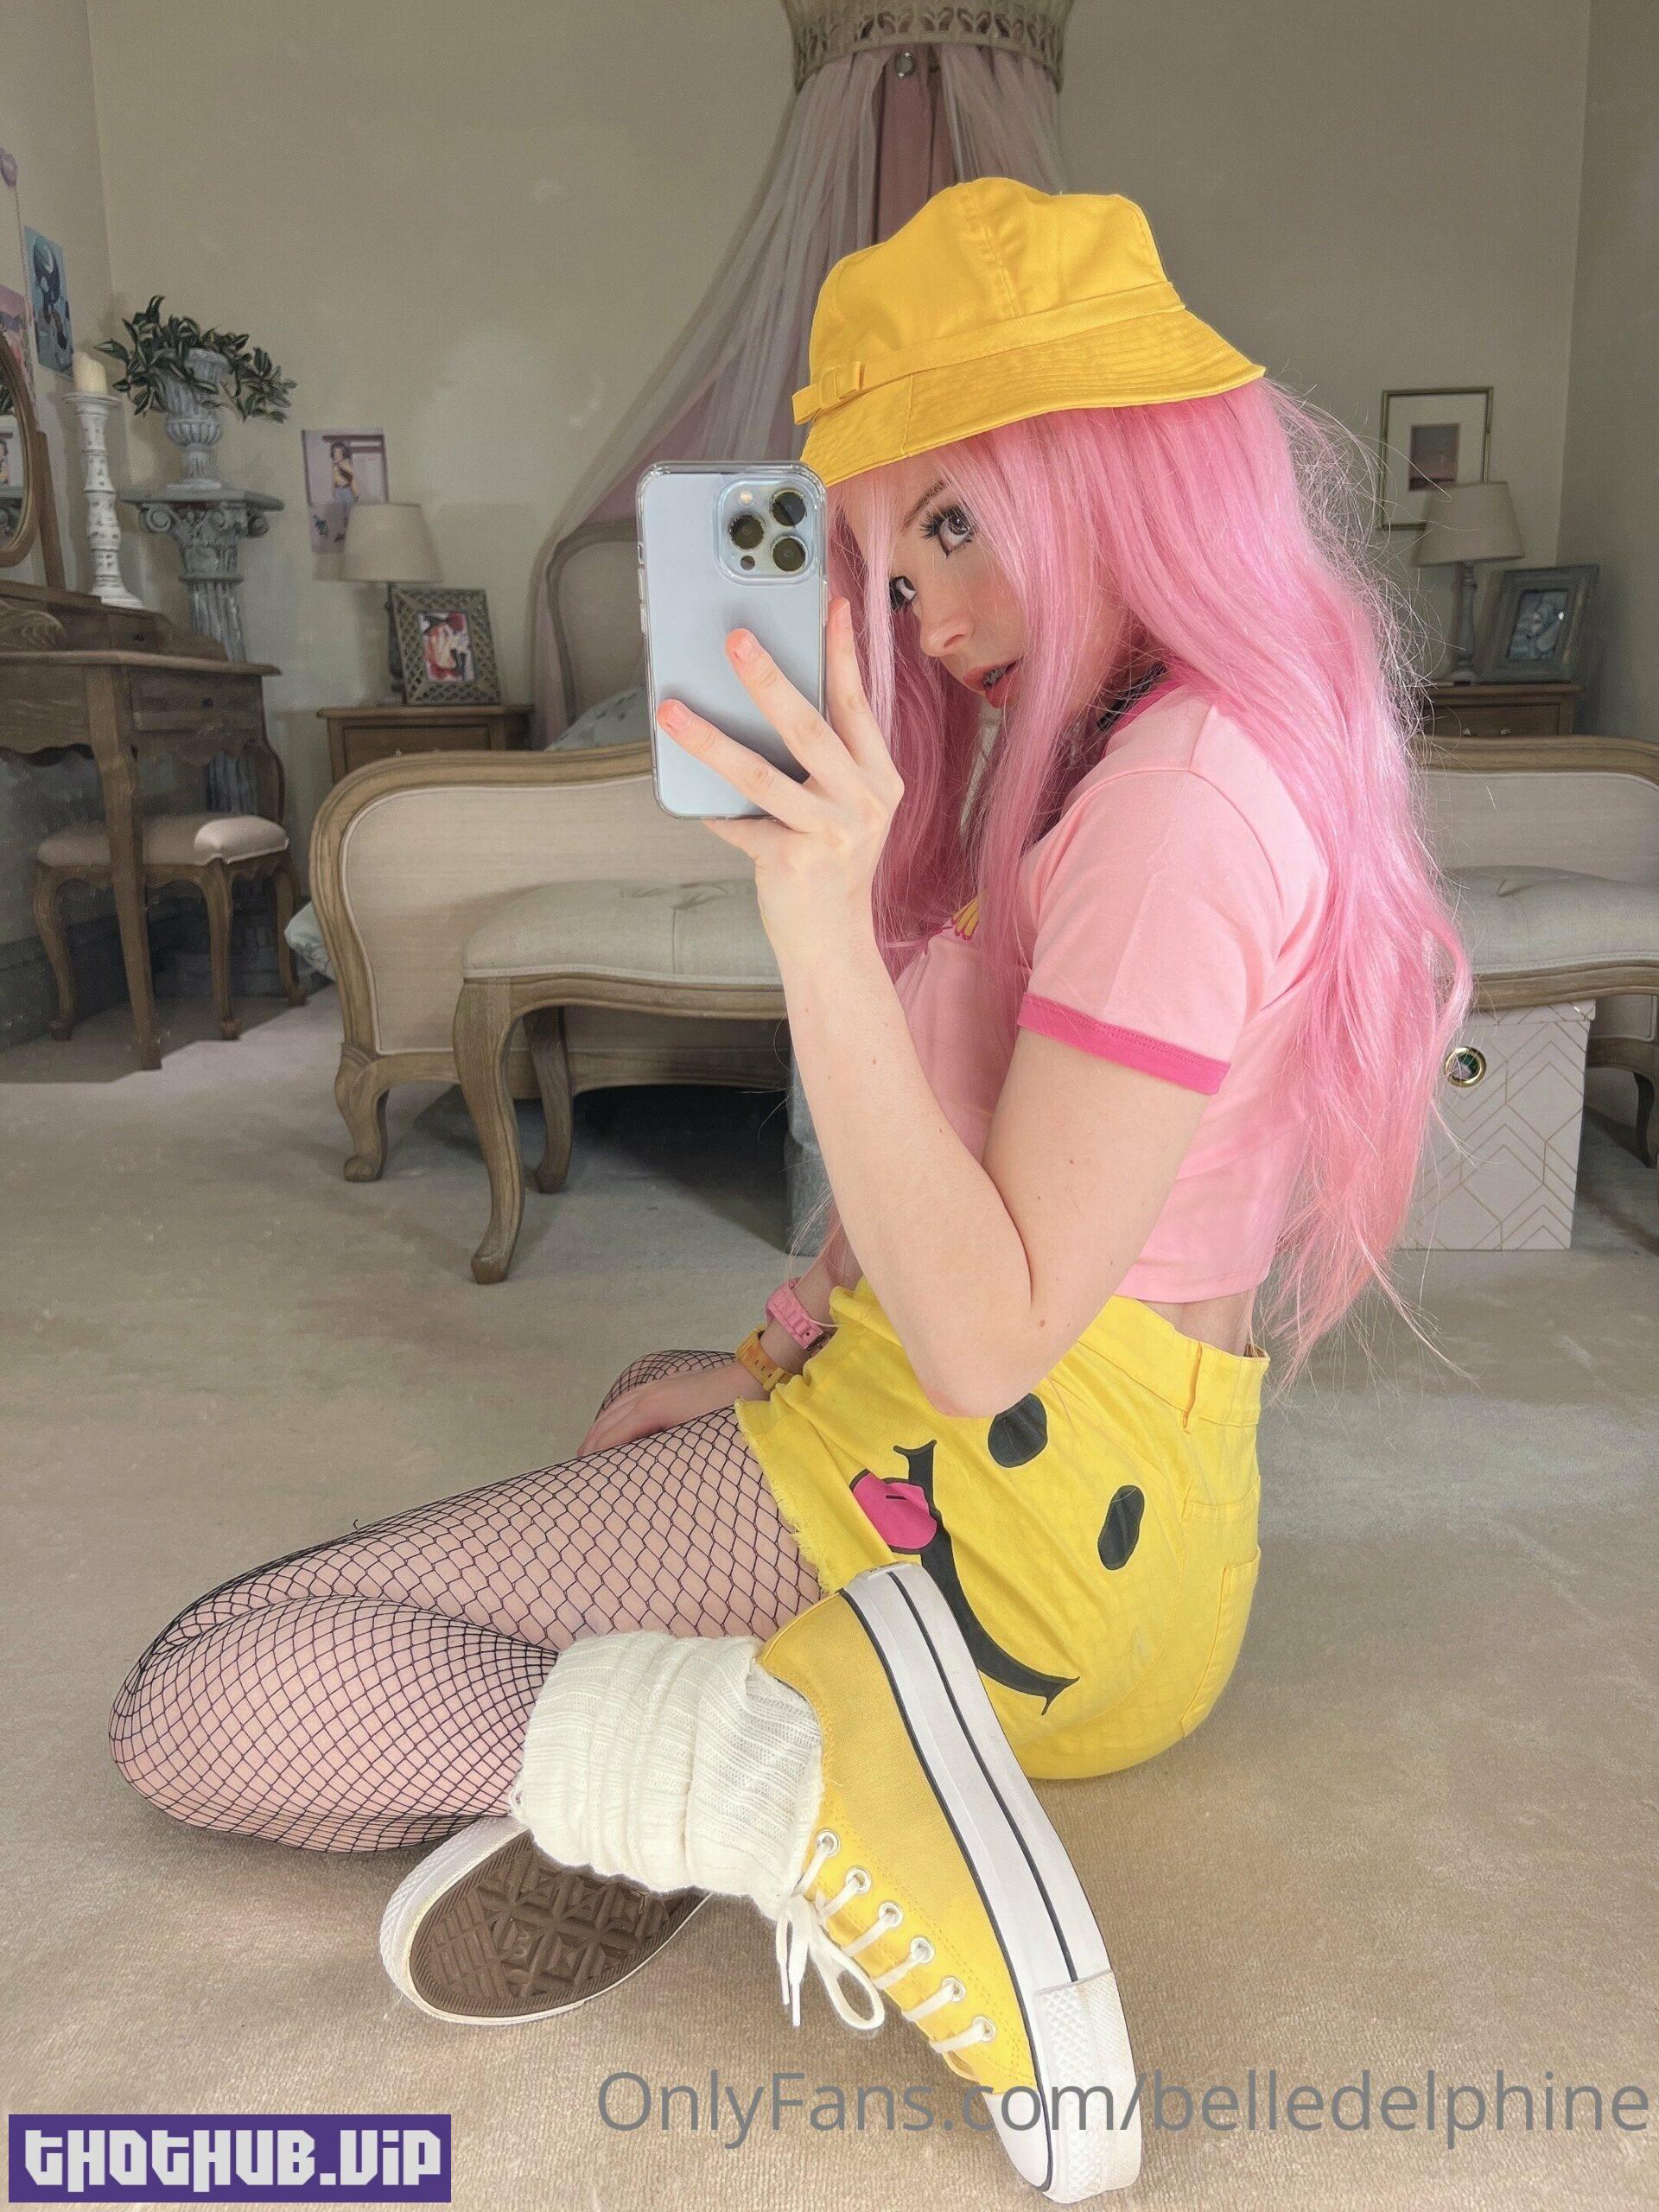 1667572860 625 Top Sexy Belle Delphine Yellow Hat Nude NSFW Porn Leak